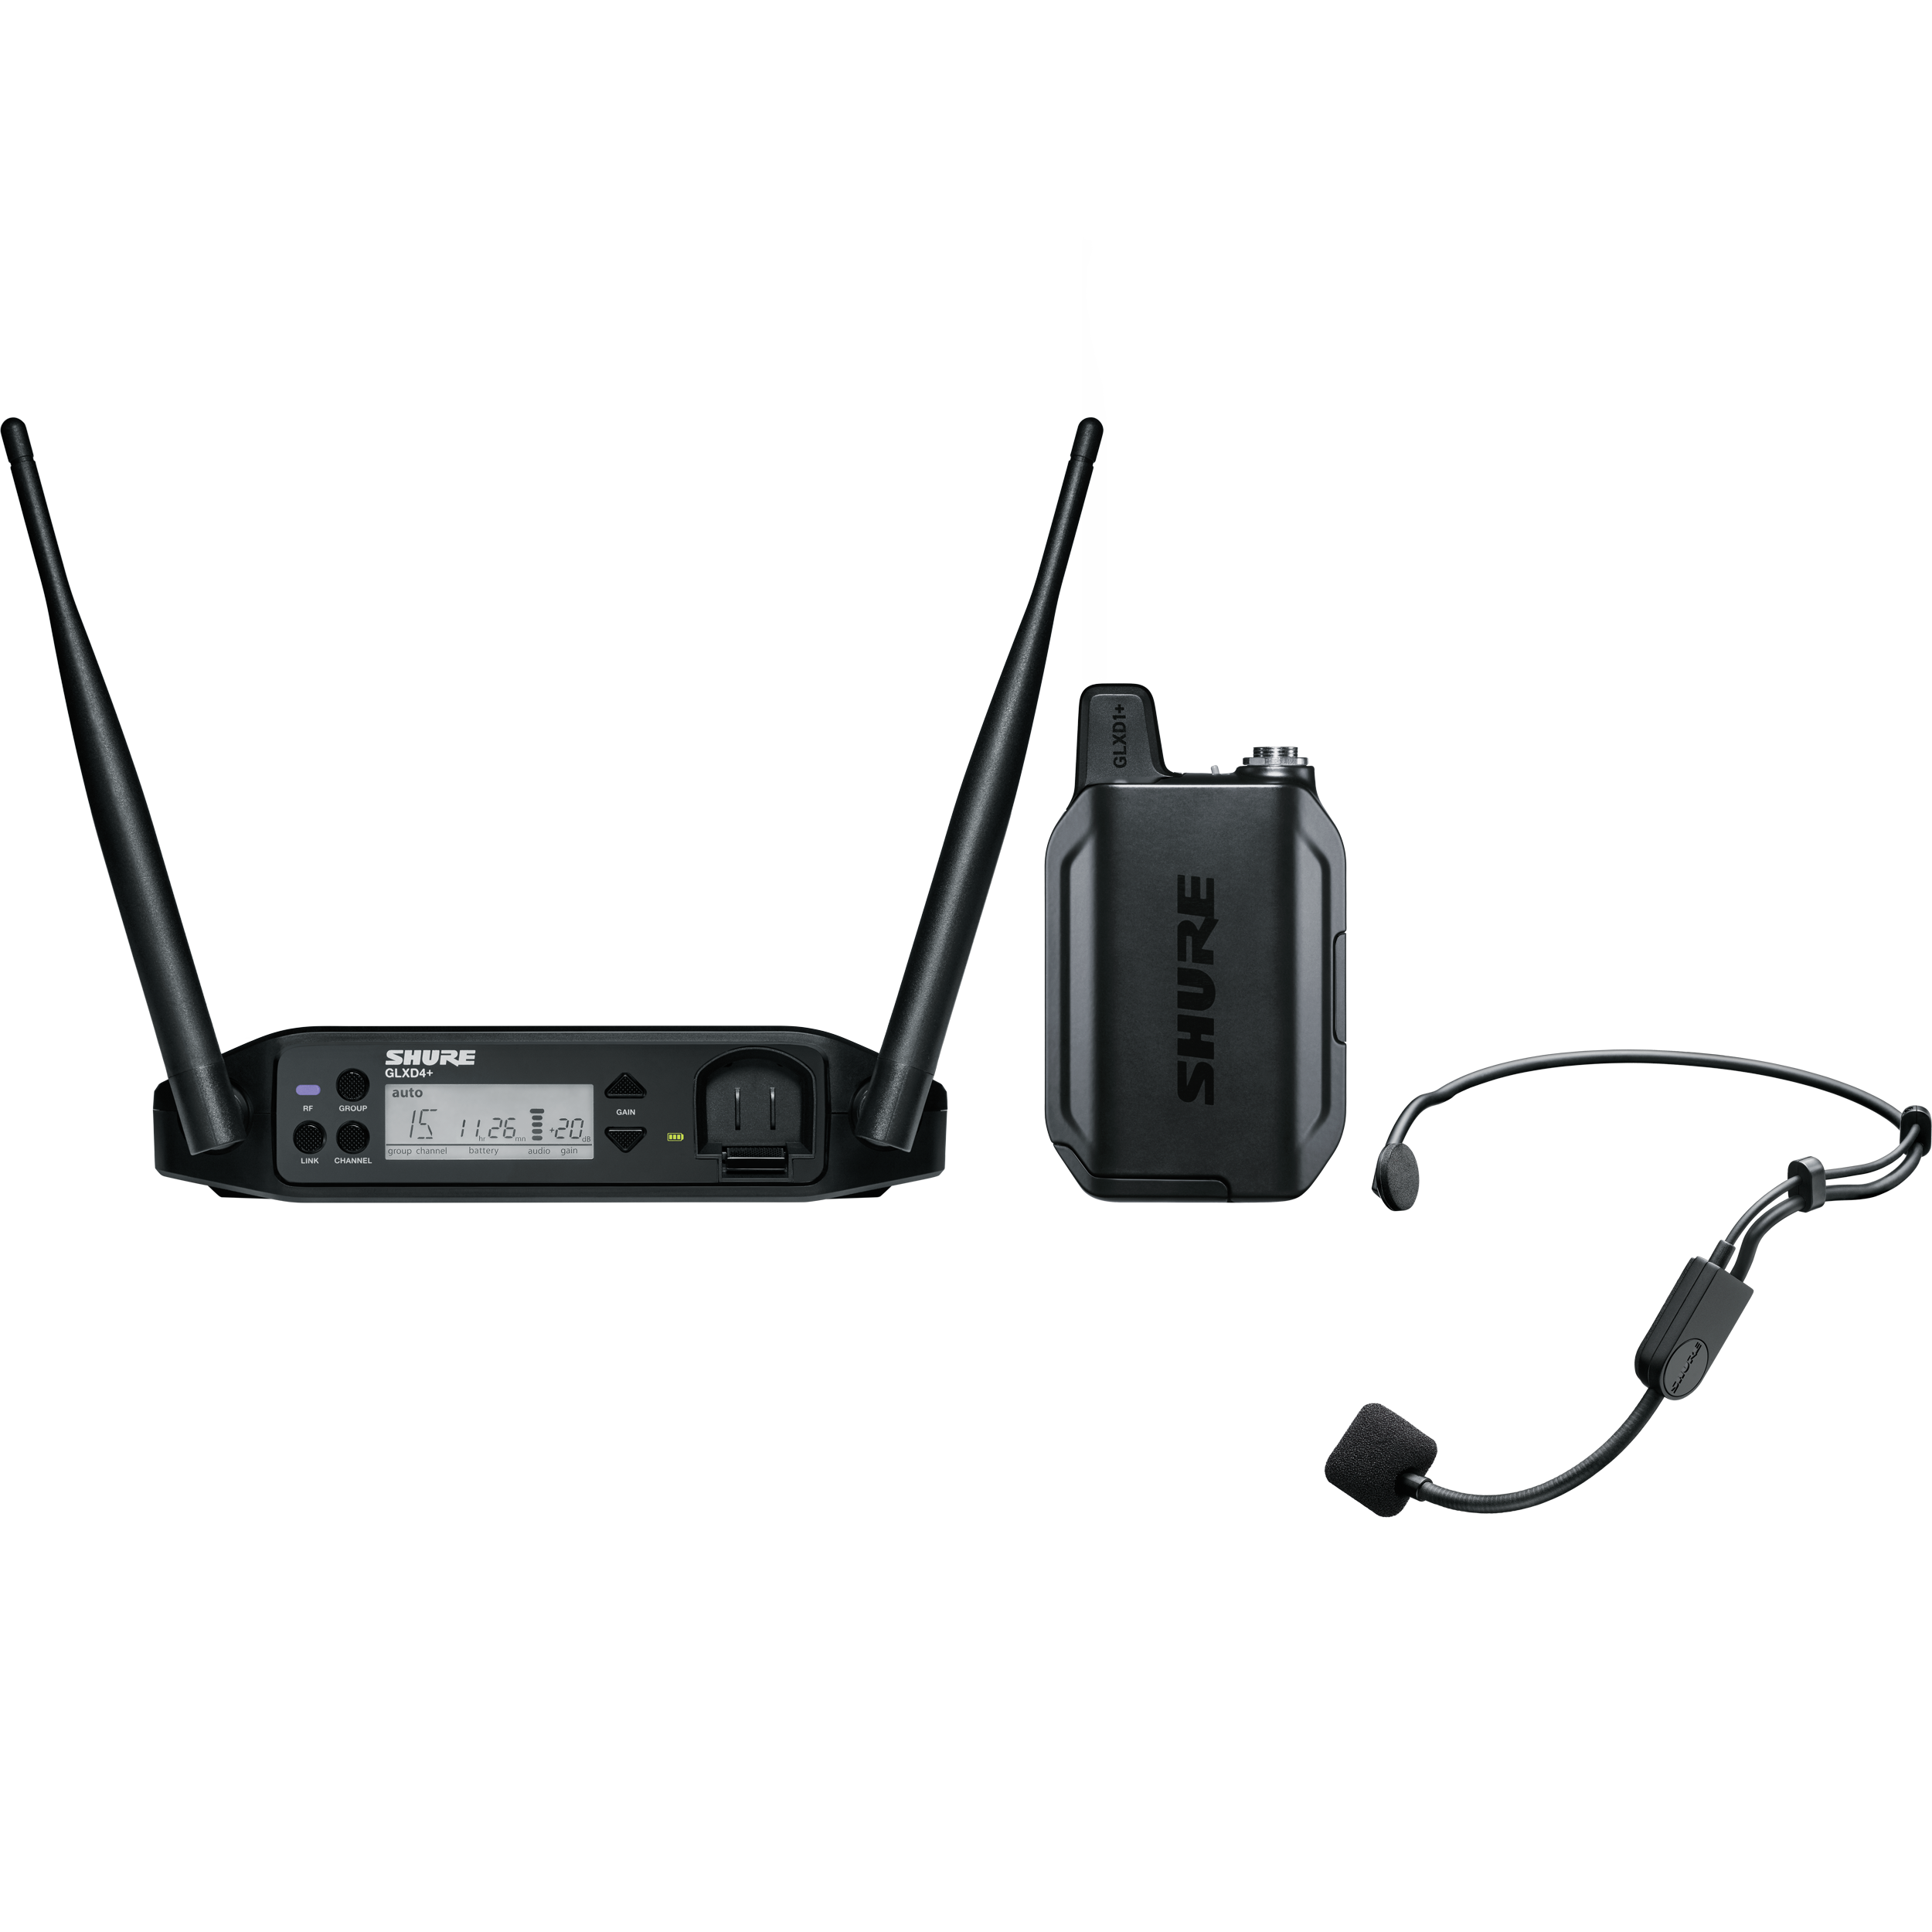 Shure GLX-D+ Dual Band Headset Wireless Microphone System